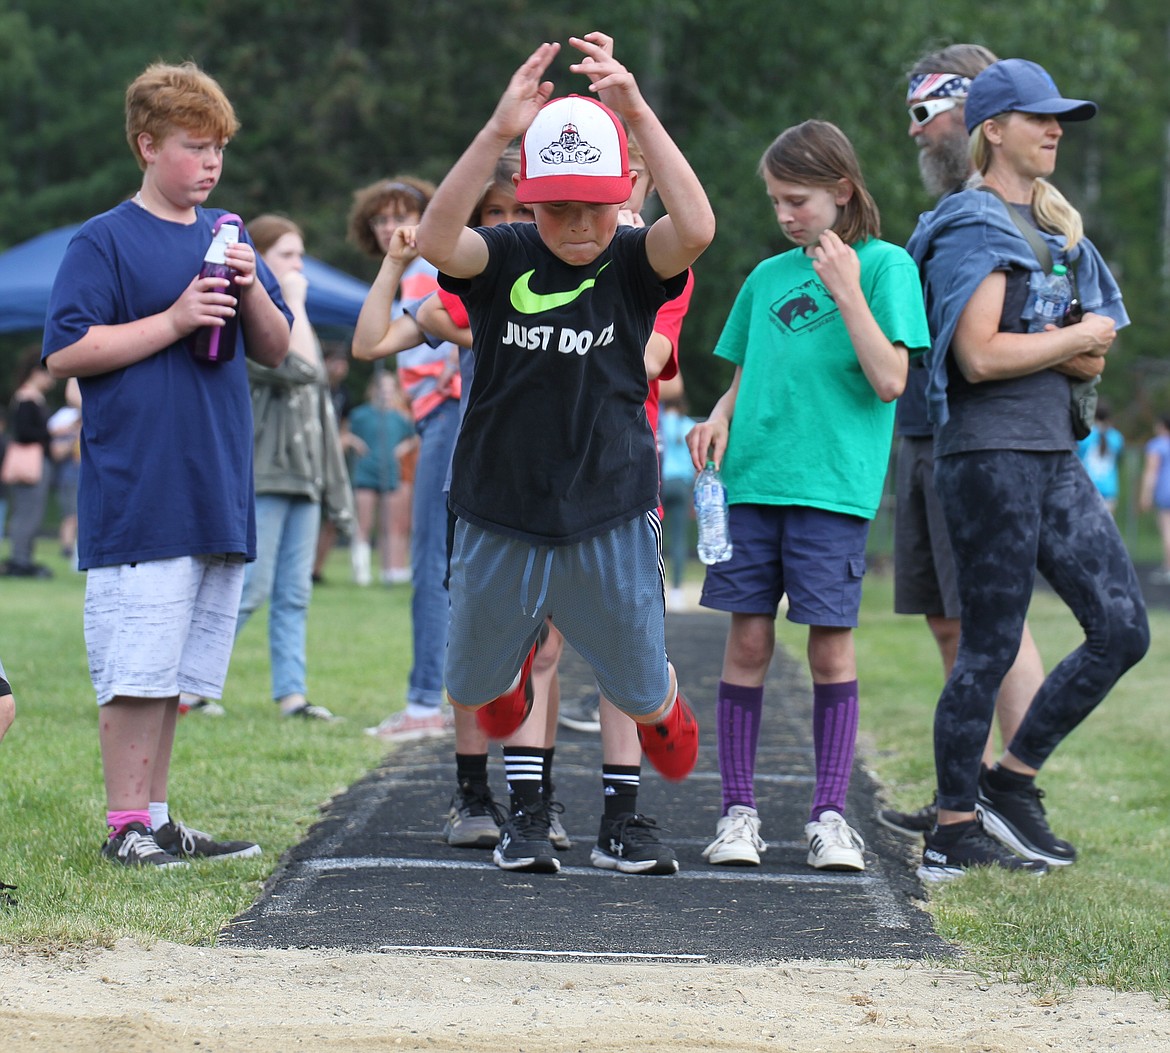 A student competes in the broad jump.